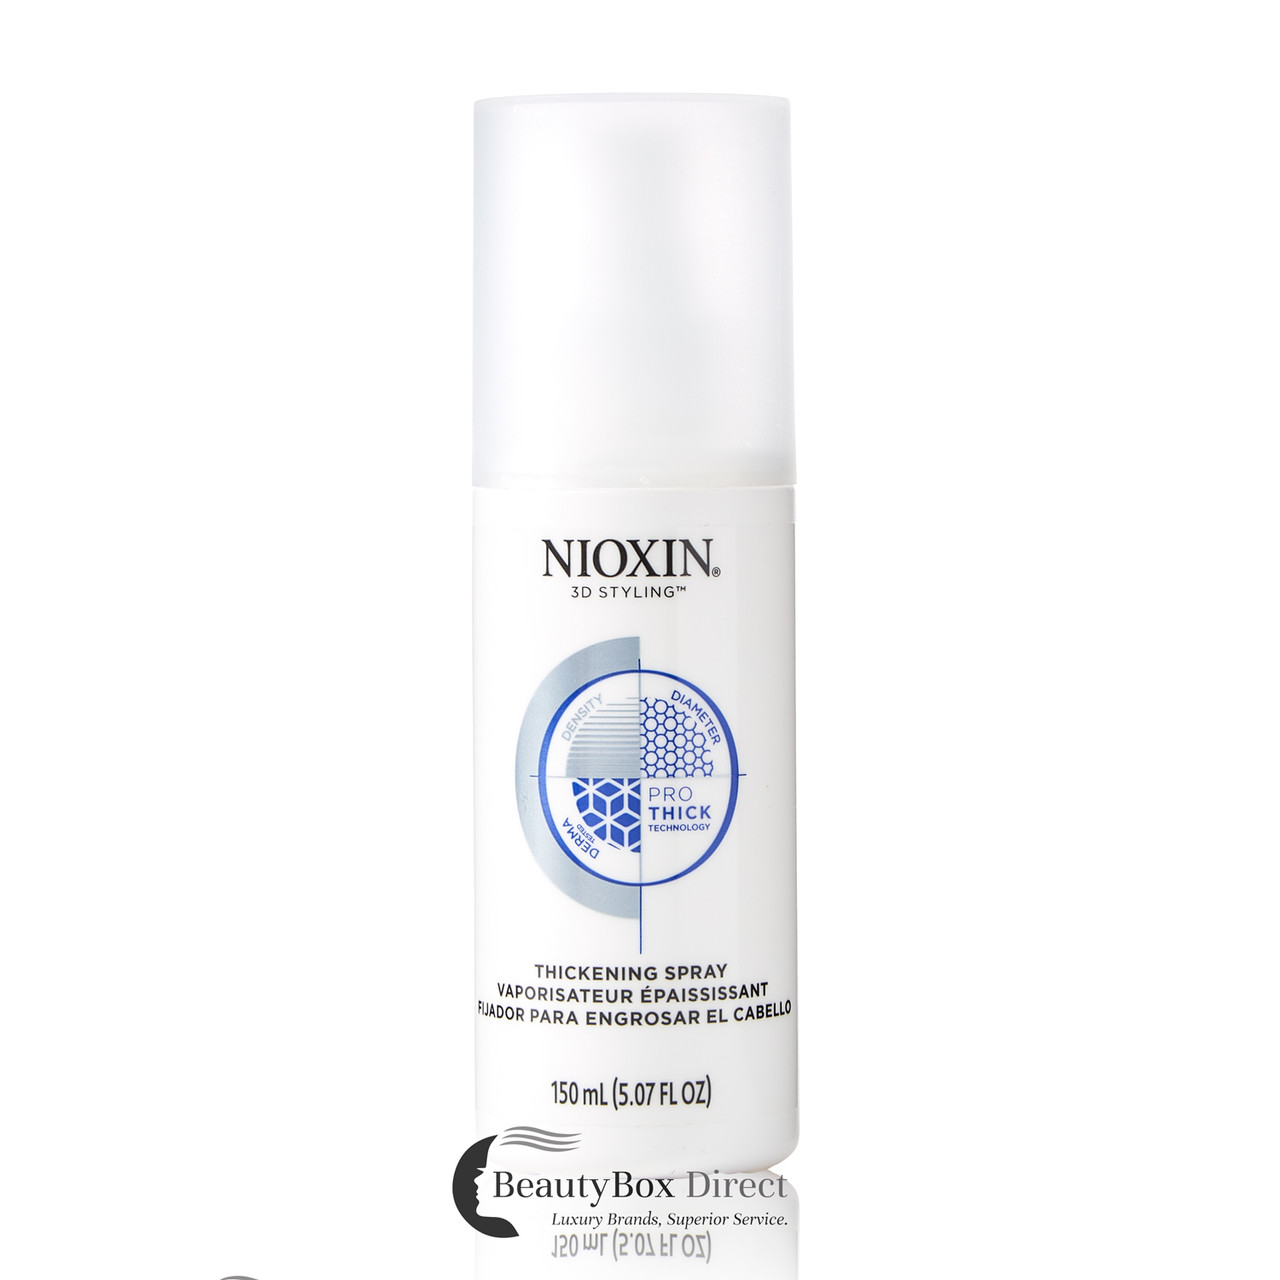 Nioxin 3D Styling Hair Thickening Spray 5.07 oz - BeautyBox Direct